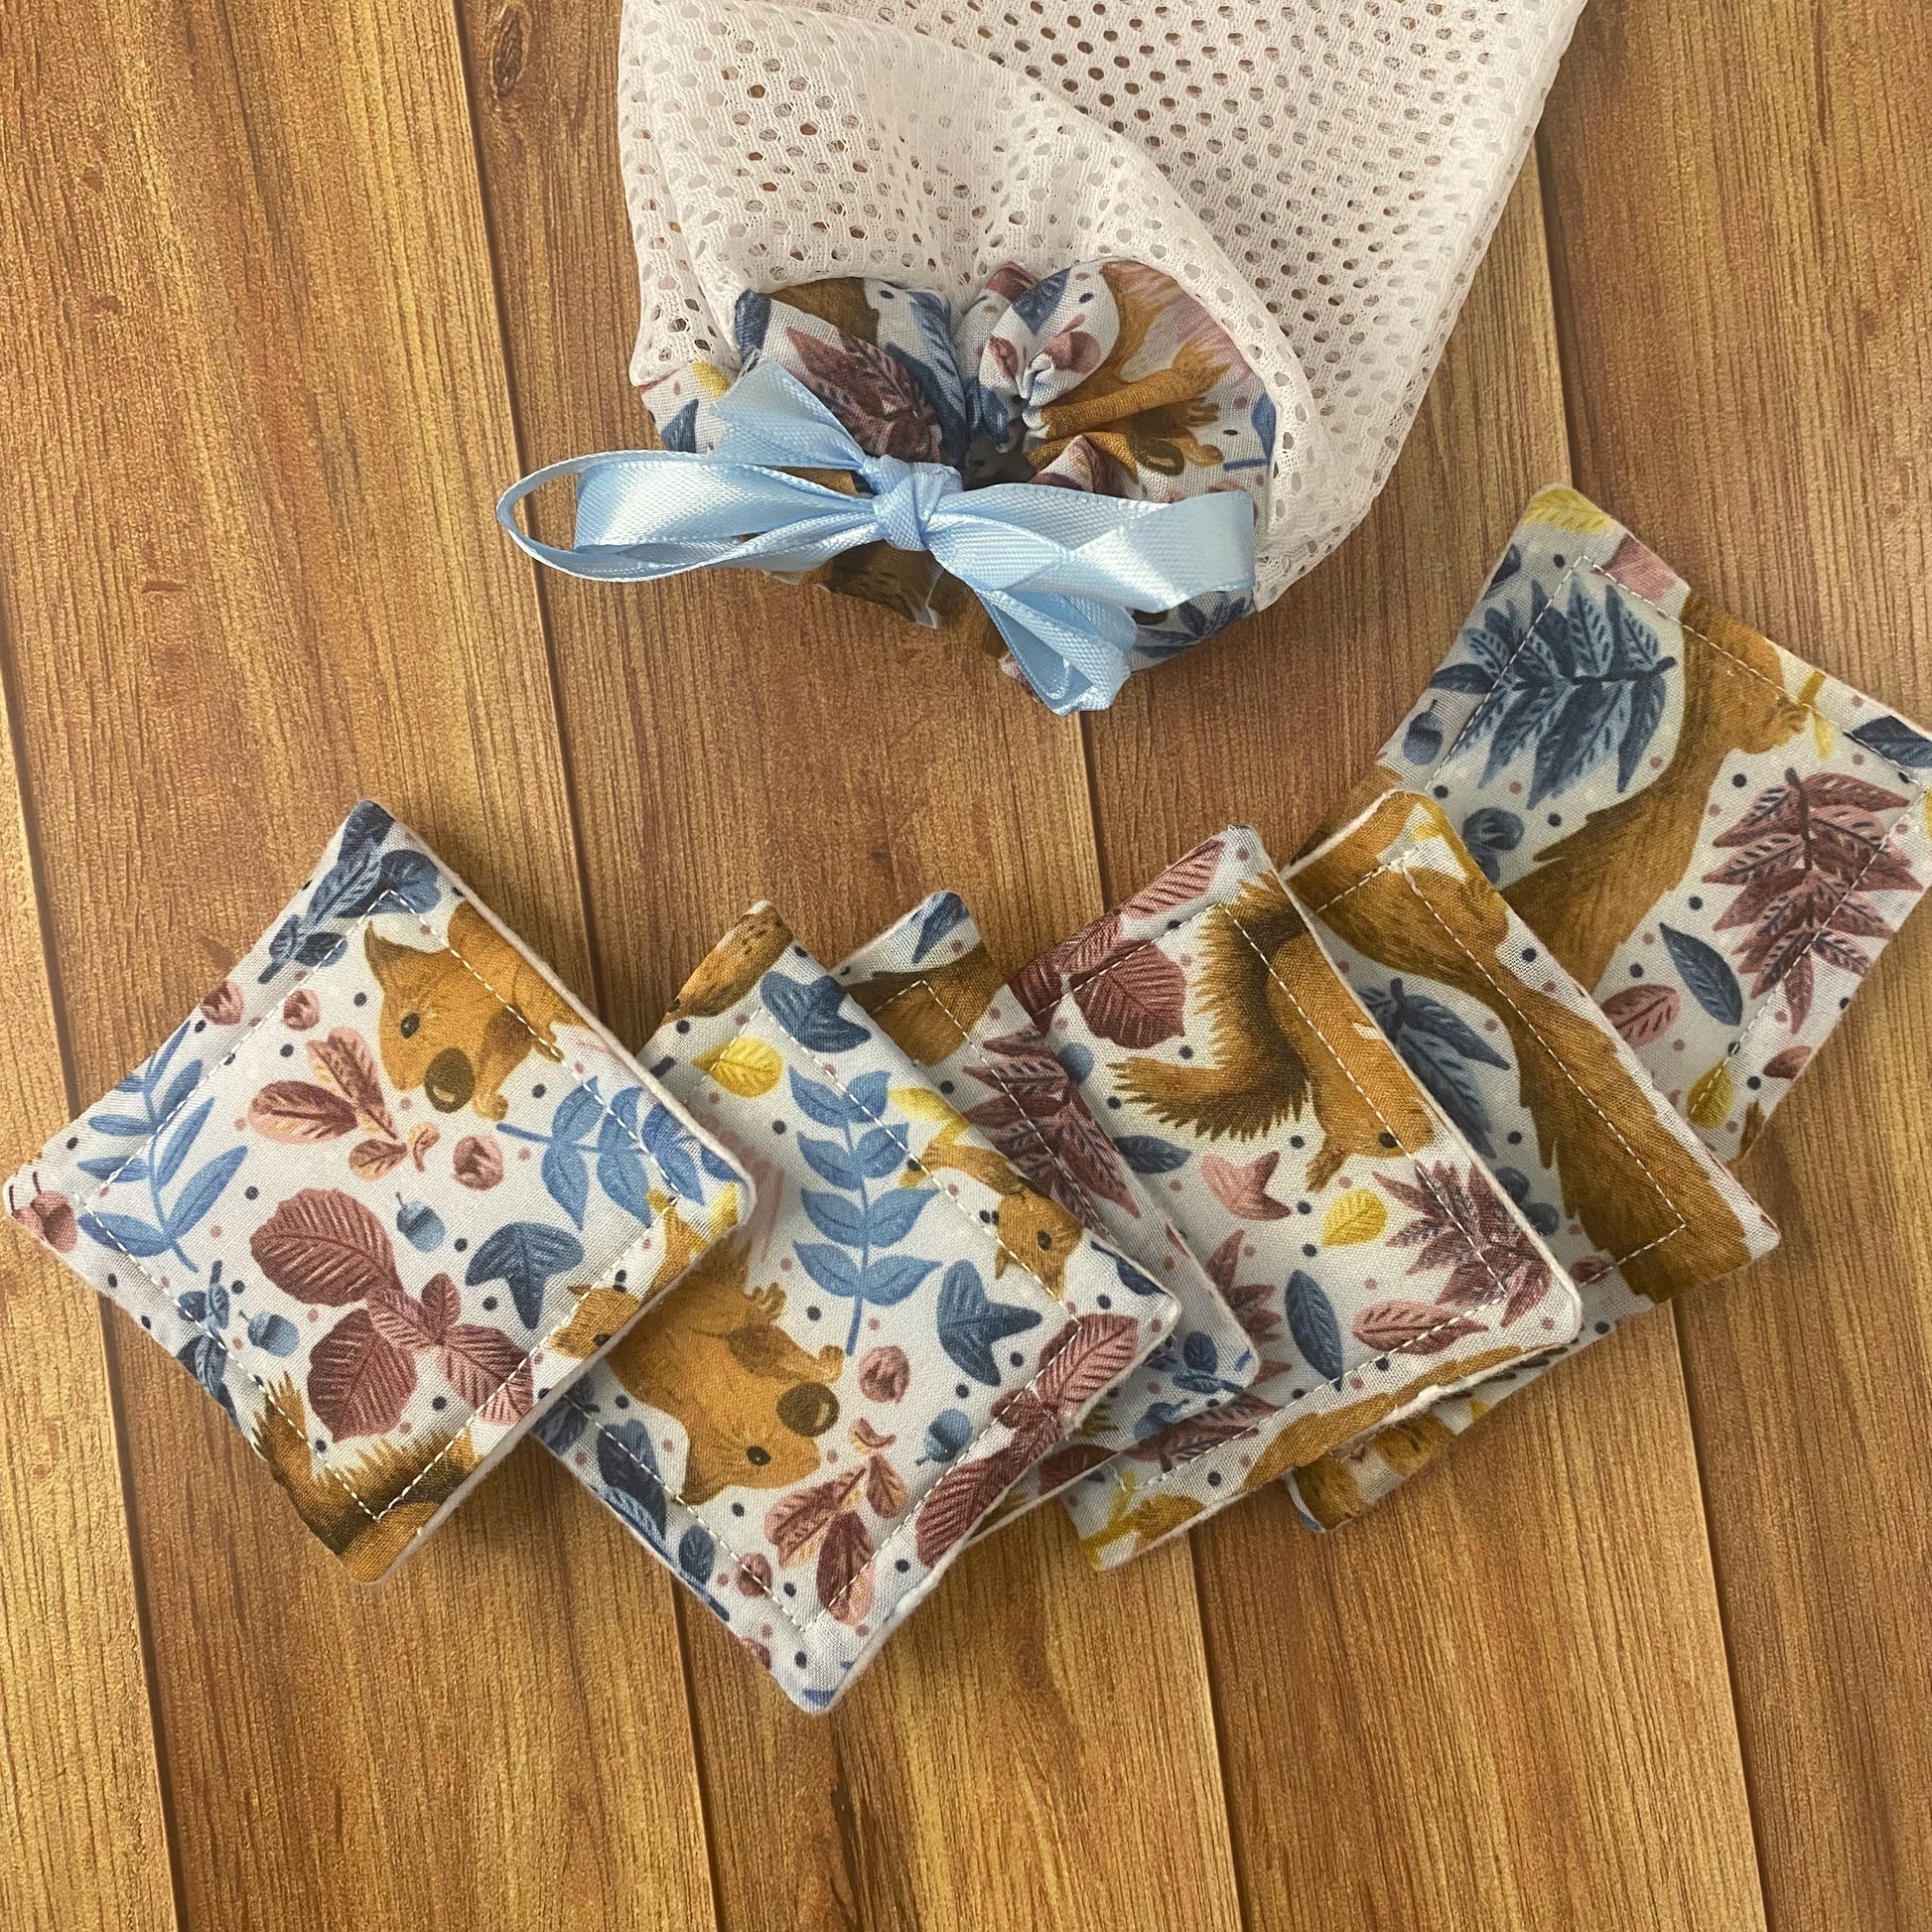 red squirrel patterned skincare pads and washbag on wood surface